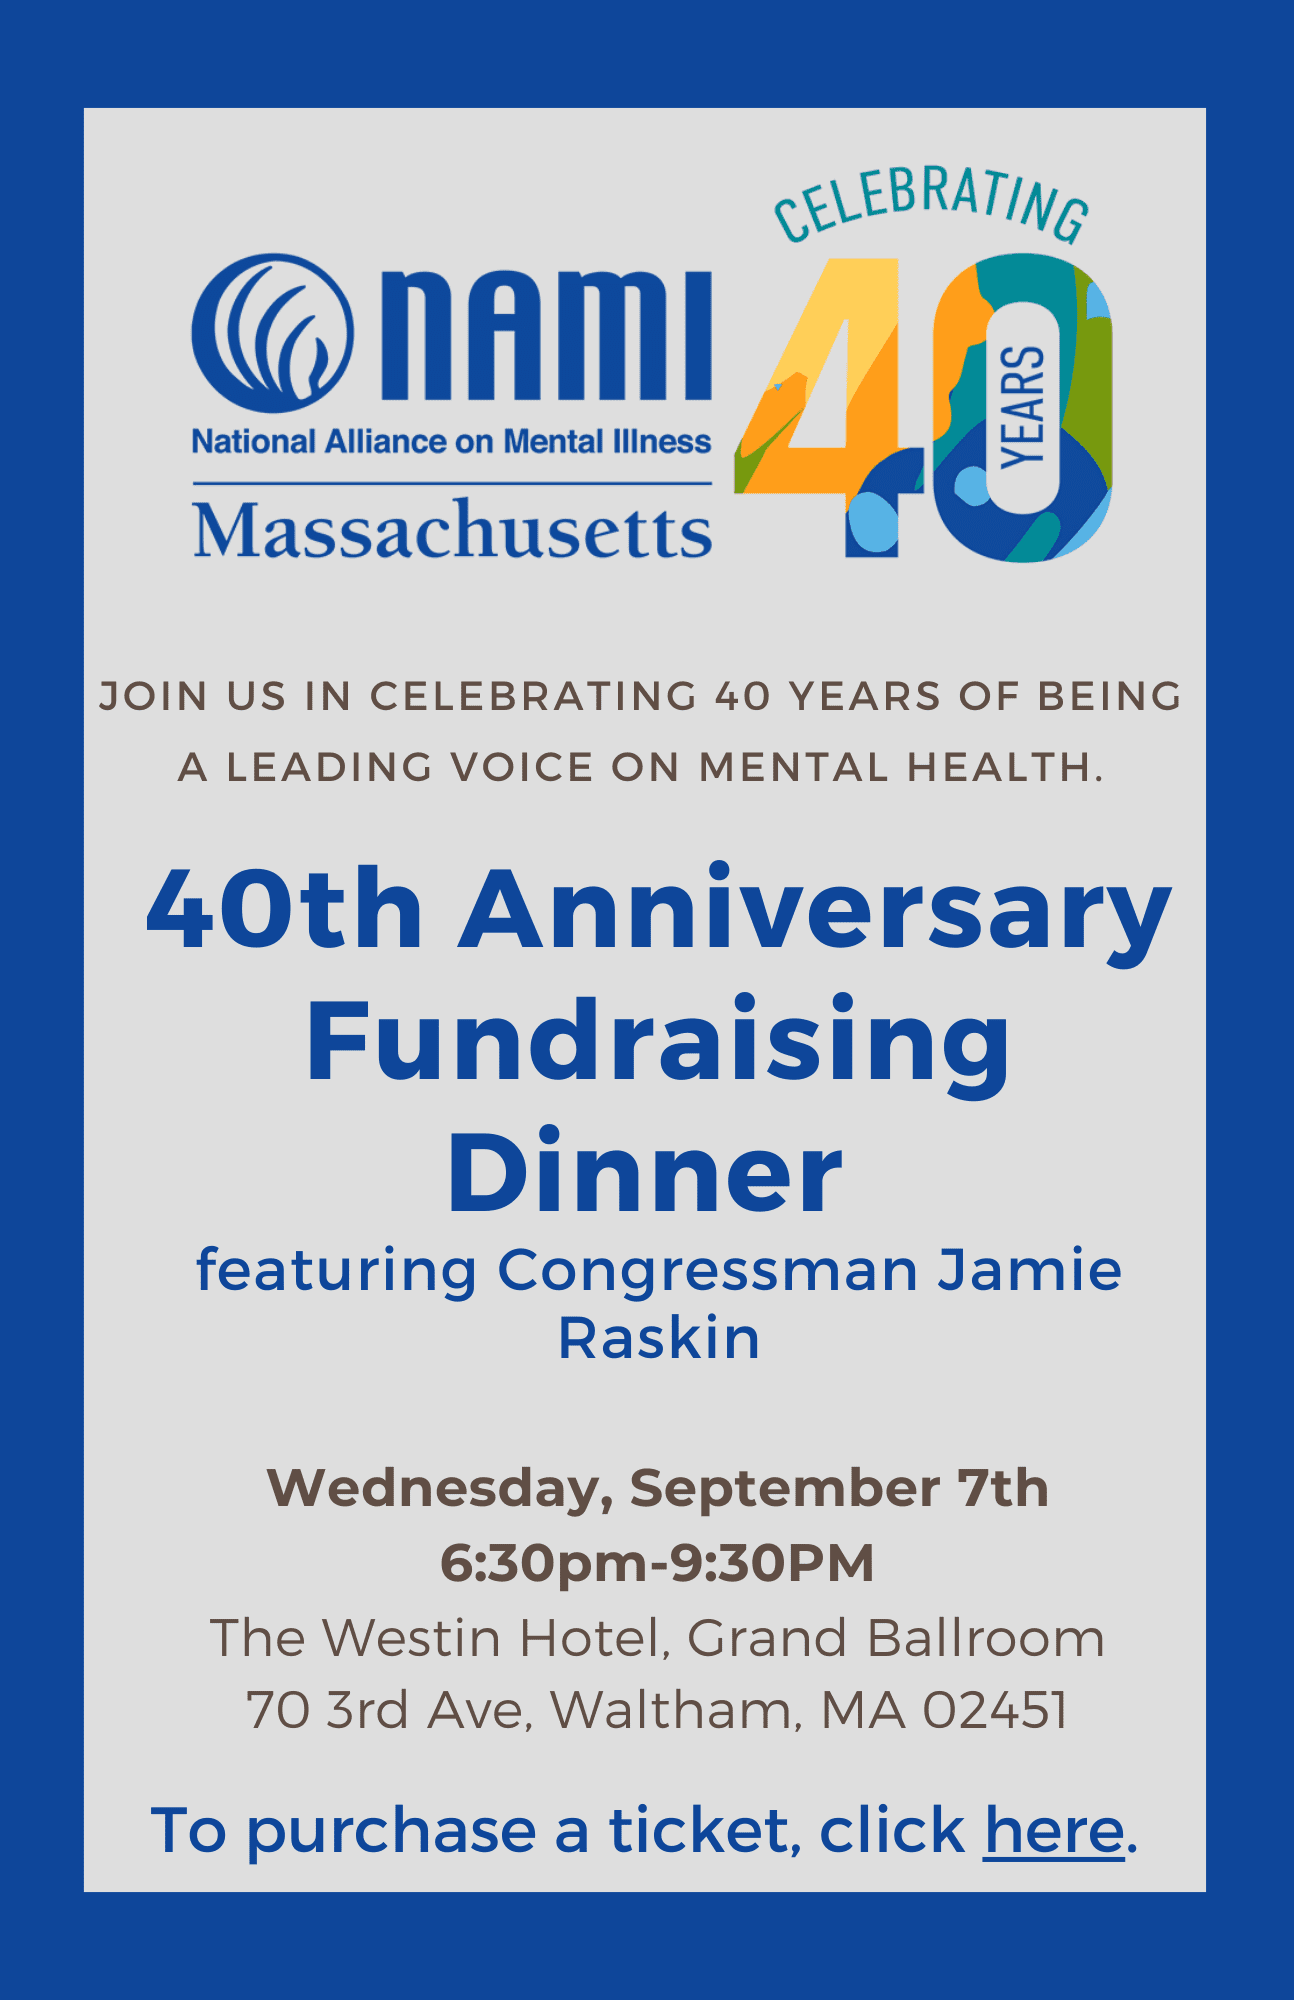 Join us in celebrating 40 years of being a leading voice on mental health. 40th Anniversary Fundraising Dinner featuring Congressman Jamie Raskin Wednesday, September 7th 6:30pm-9:30pm The Westin Hotel, Grand Ballroom 70 3rd Ave, Waltham, MA 02451